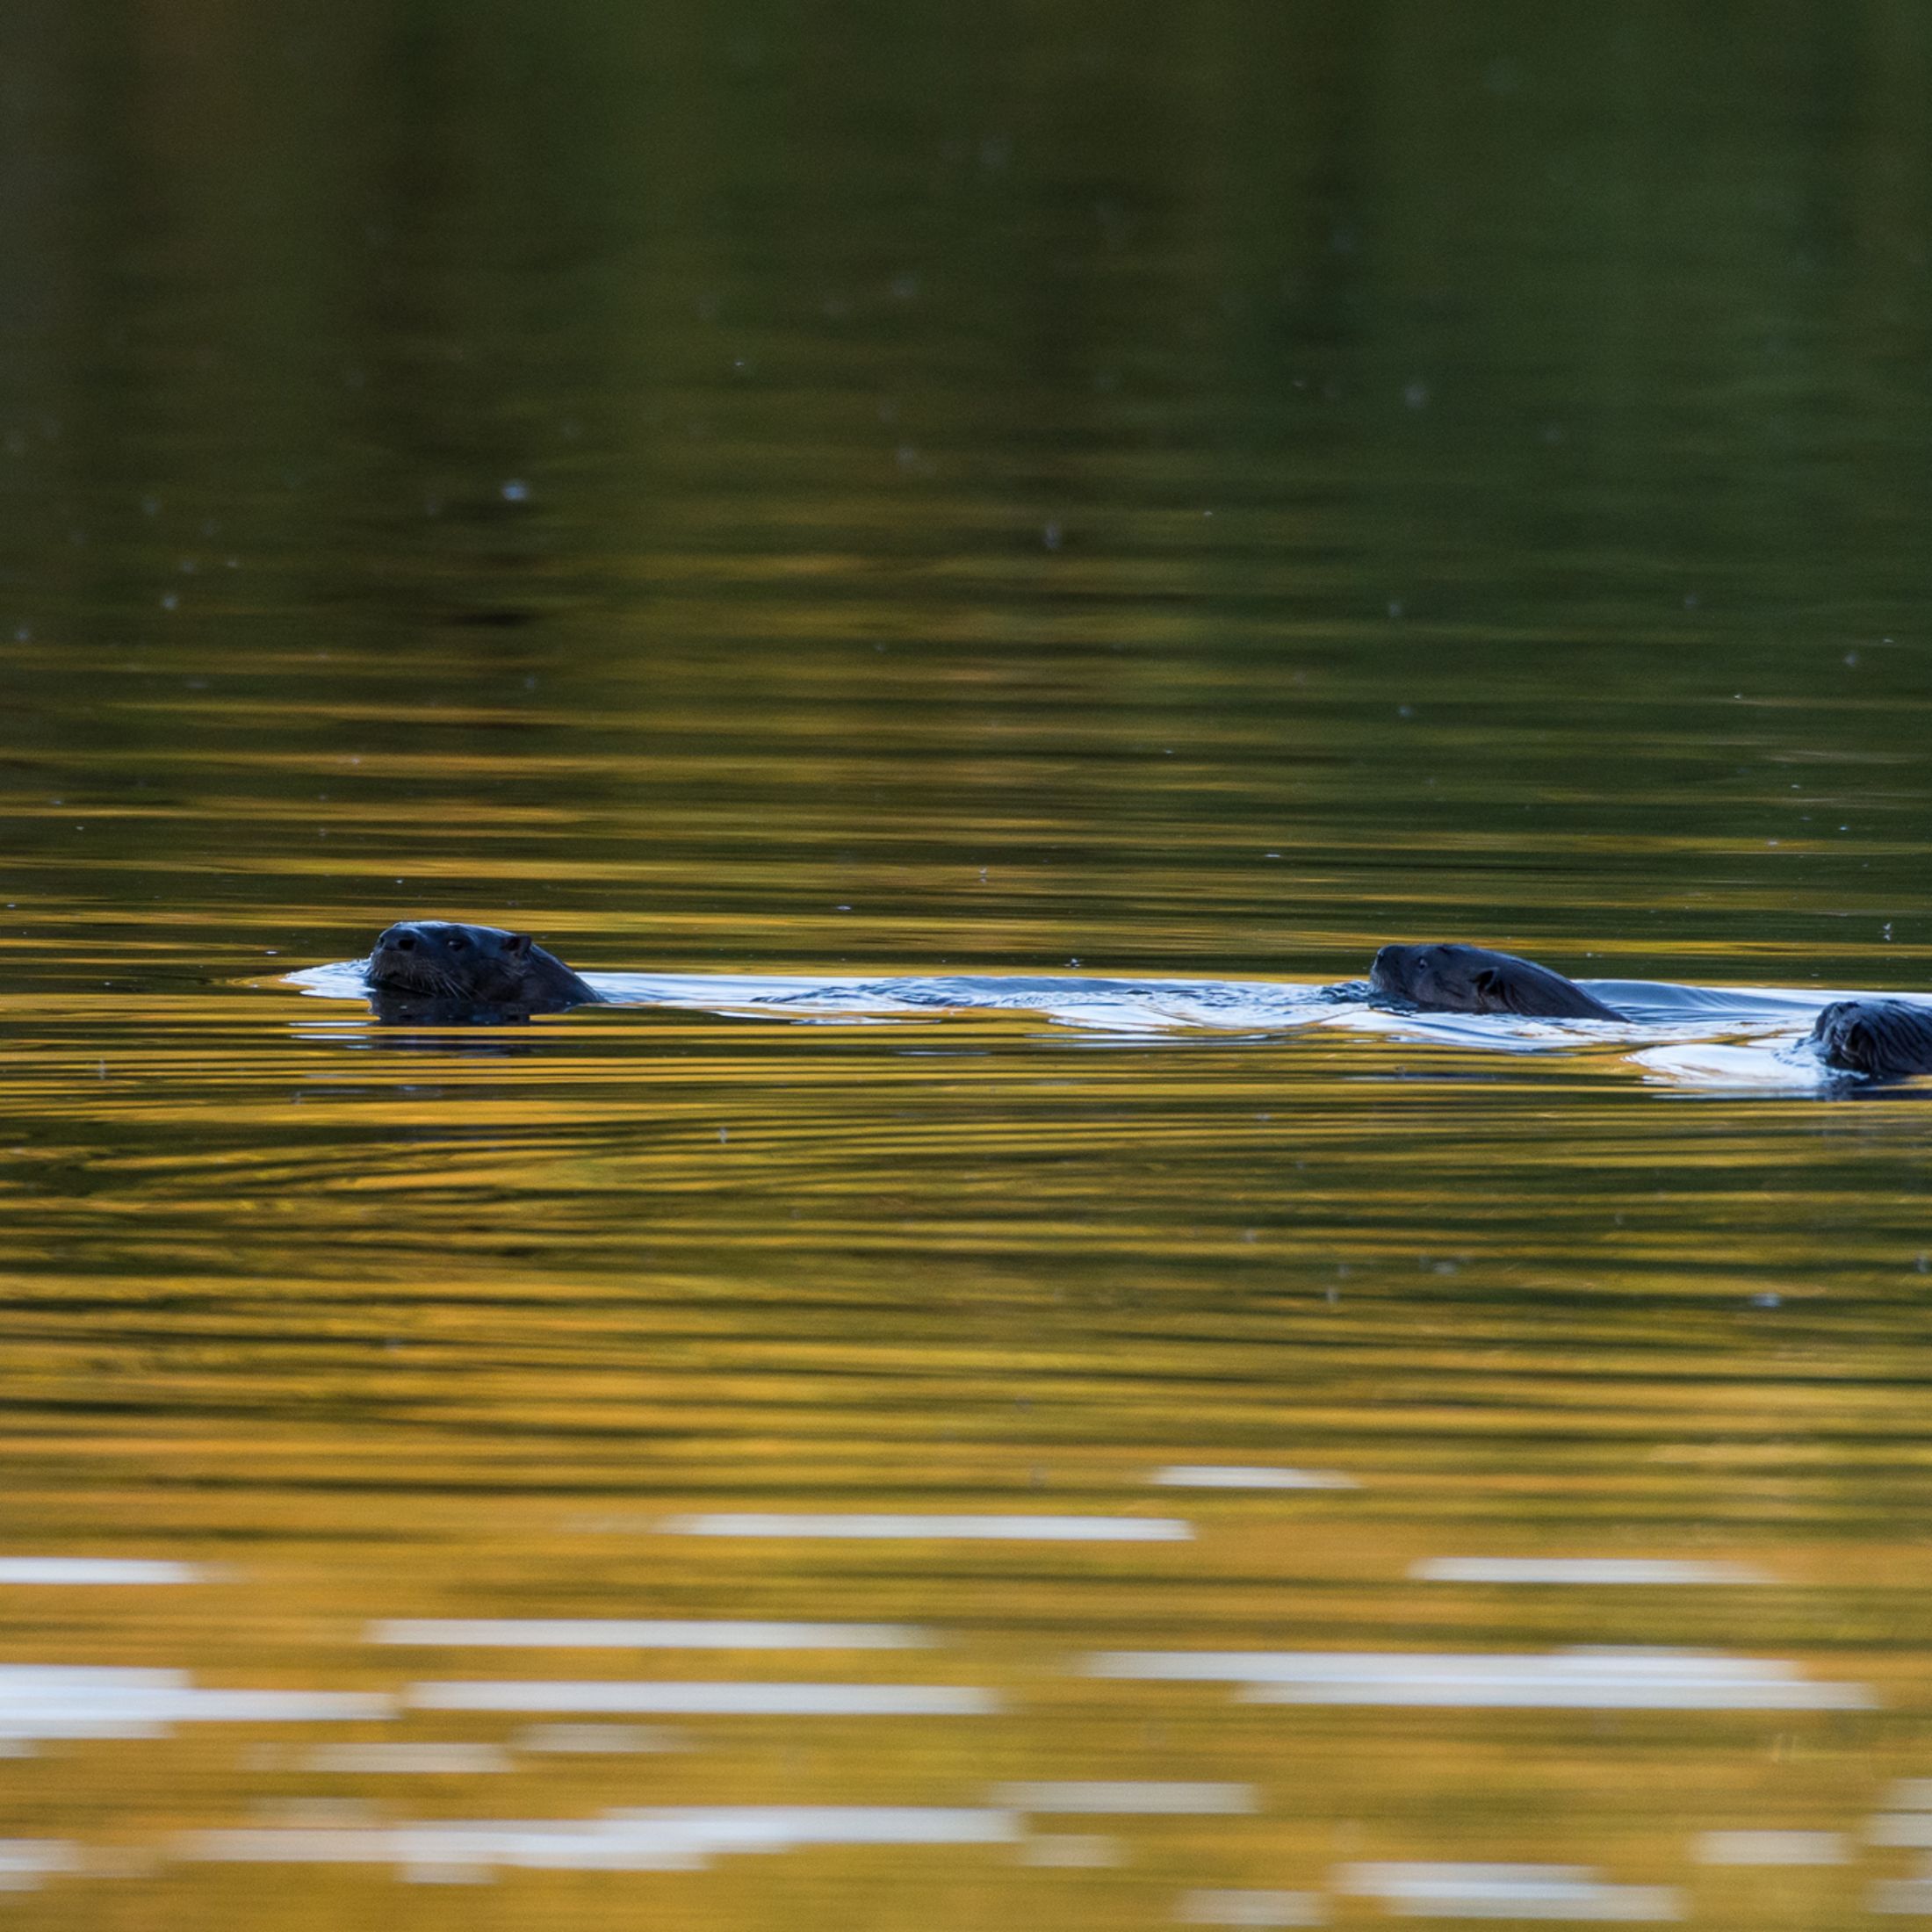 Three otters swimming in a pond that is yellow from reflected light. 